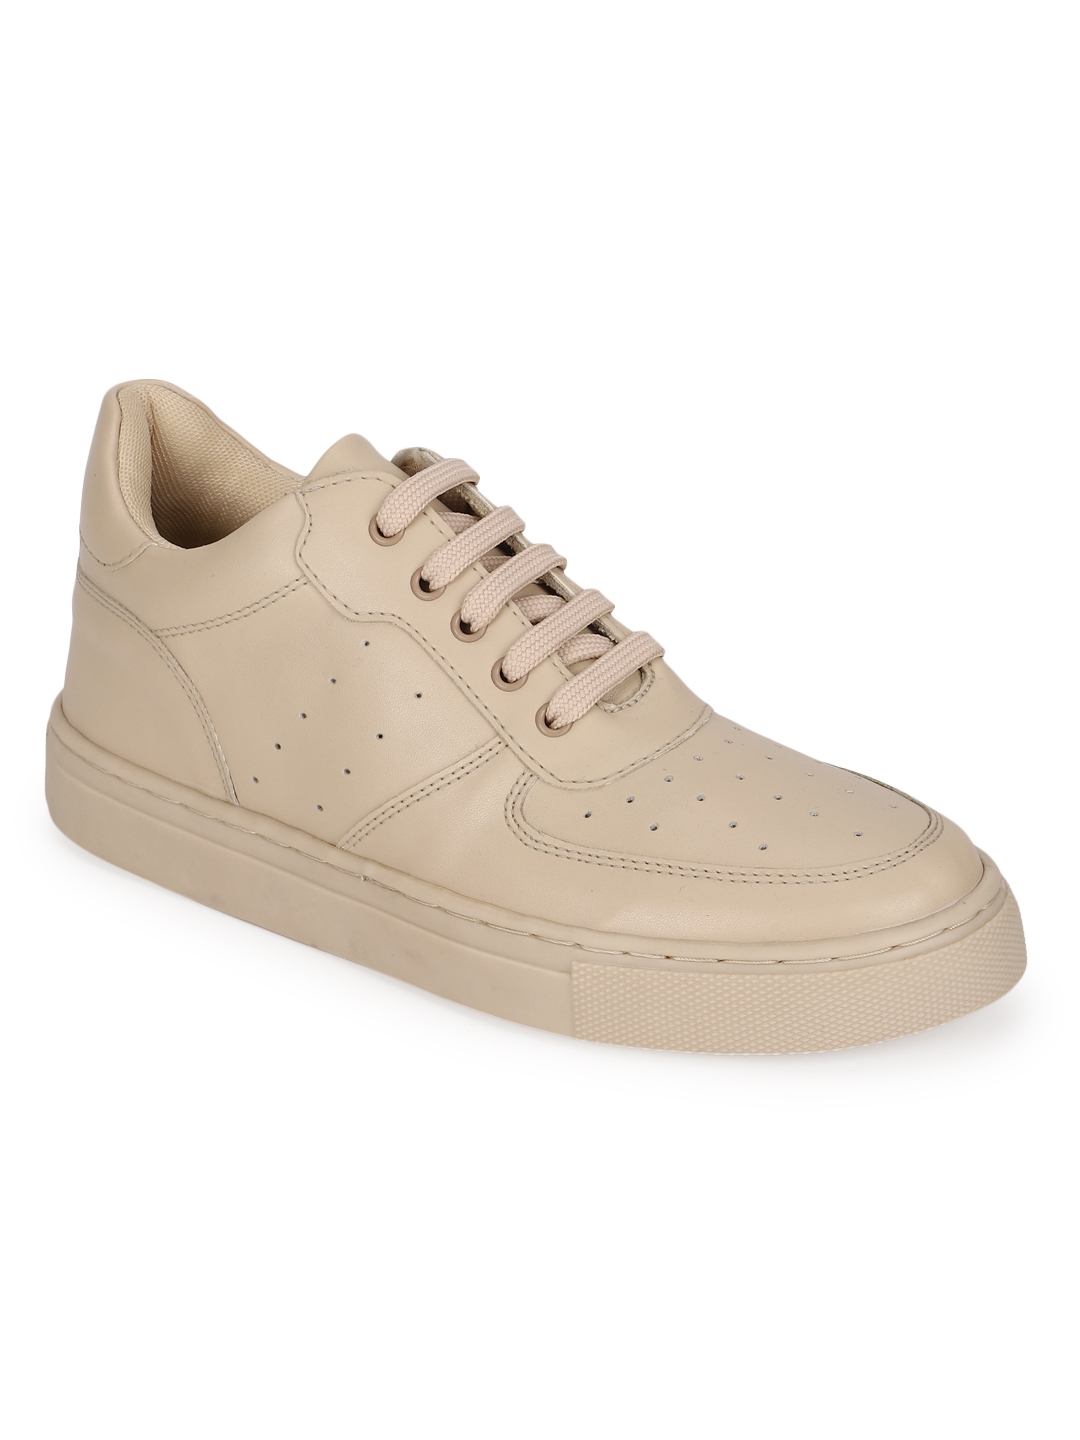 Truffle Collection | Cream PU Perforated Lace Up Sneakers